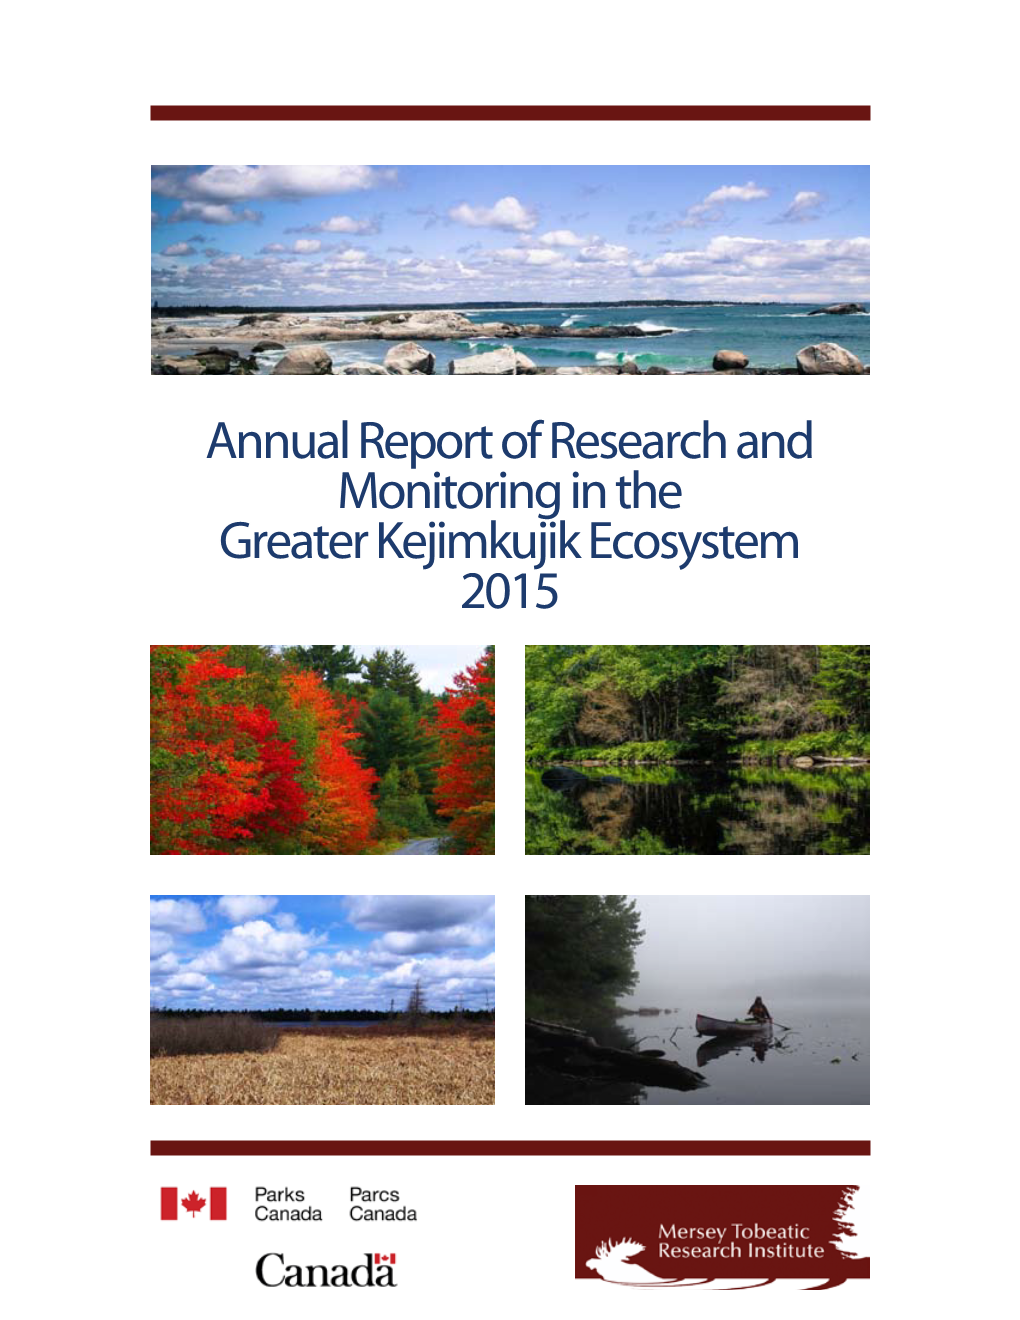 Annual Report of Research and Monitoring in the Greater Kejimkujik Ecosystem 2015 Citation: Mersey Tobeatic Research Institute and Parks Canada